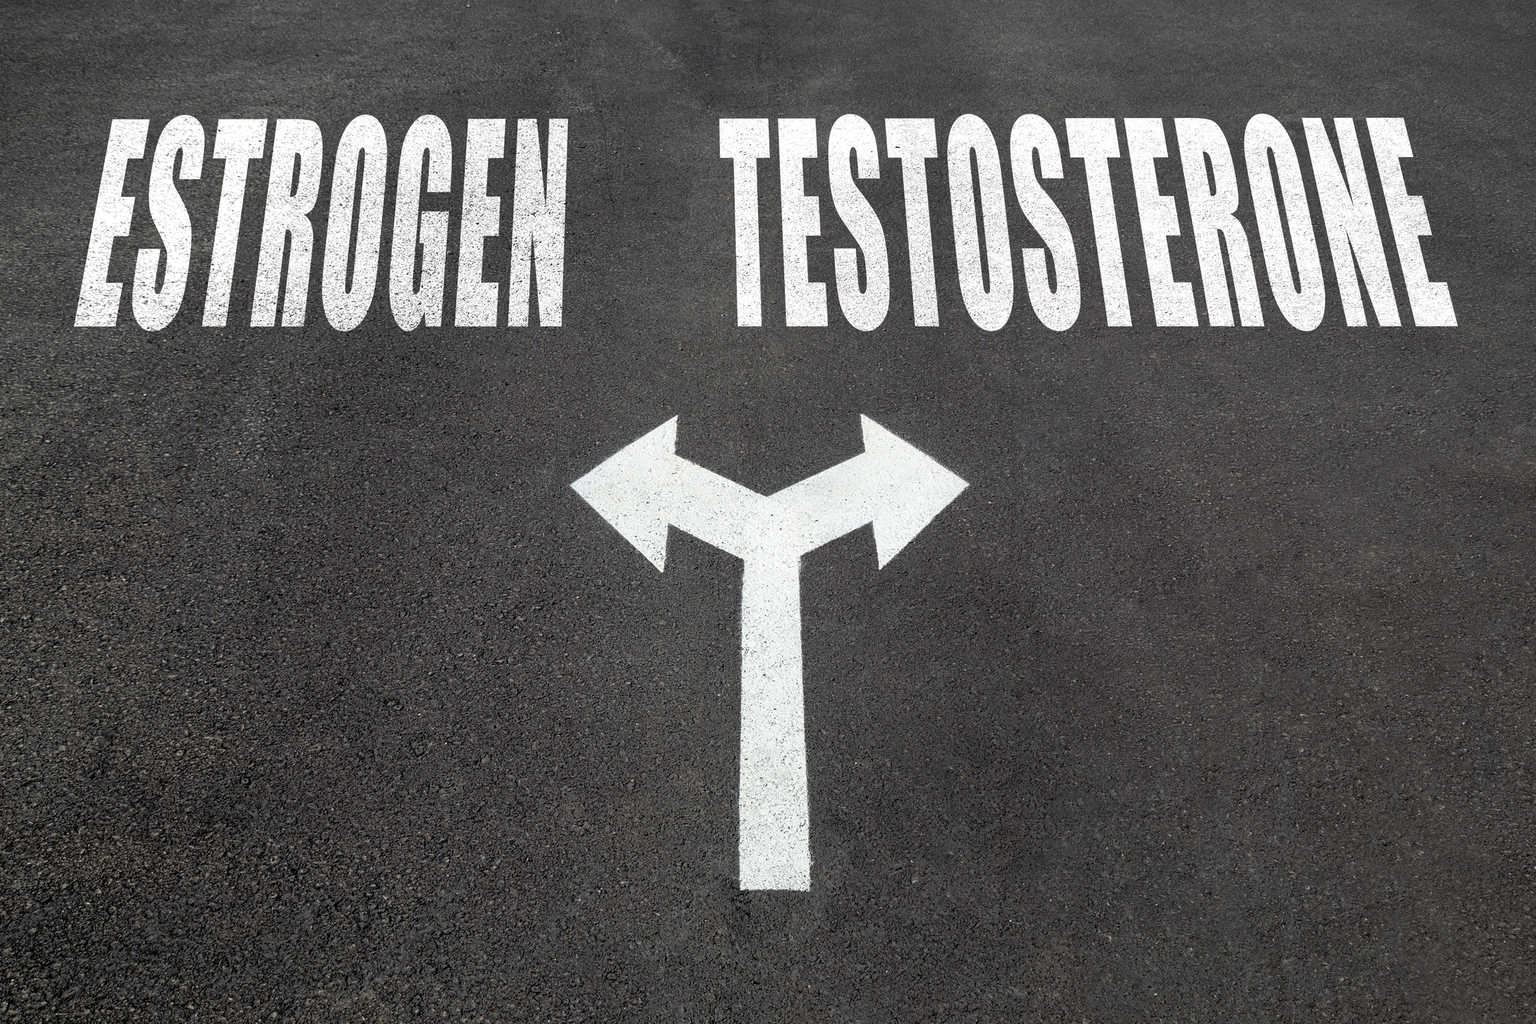 Study: 26 days for lower estrogen and higher T